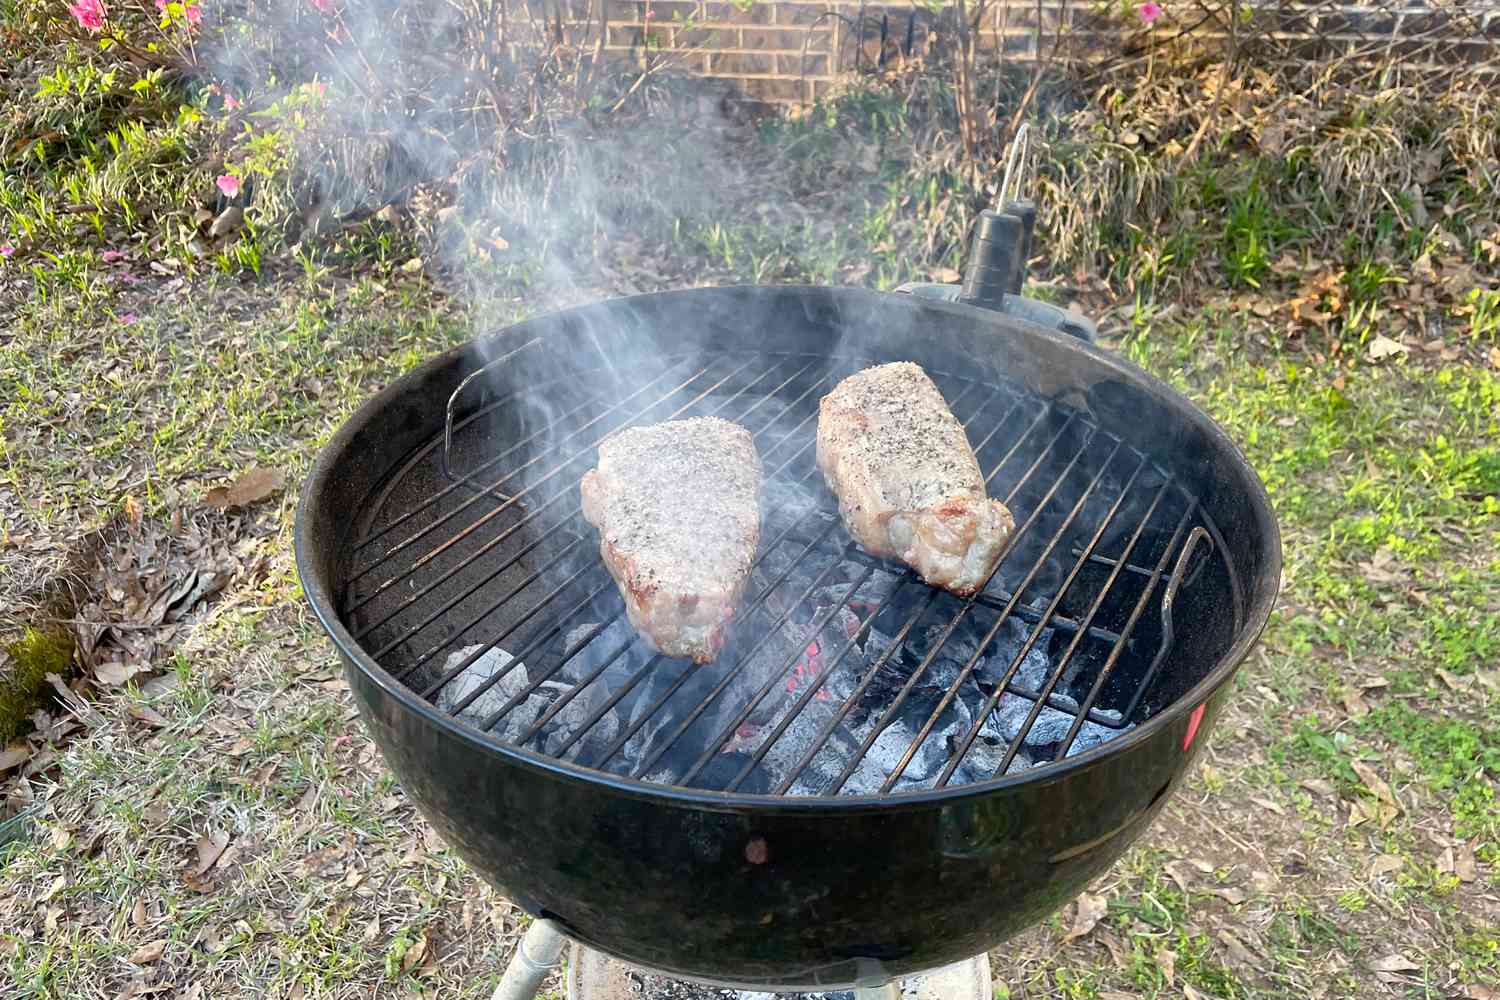 two steaks cooking on a charcoal grill